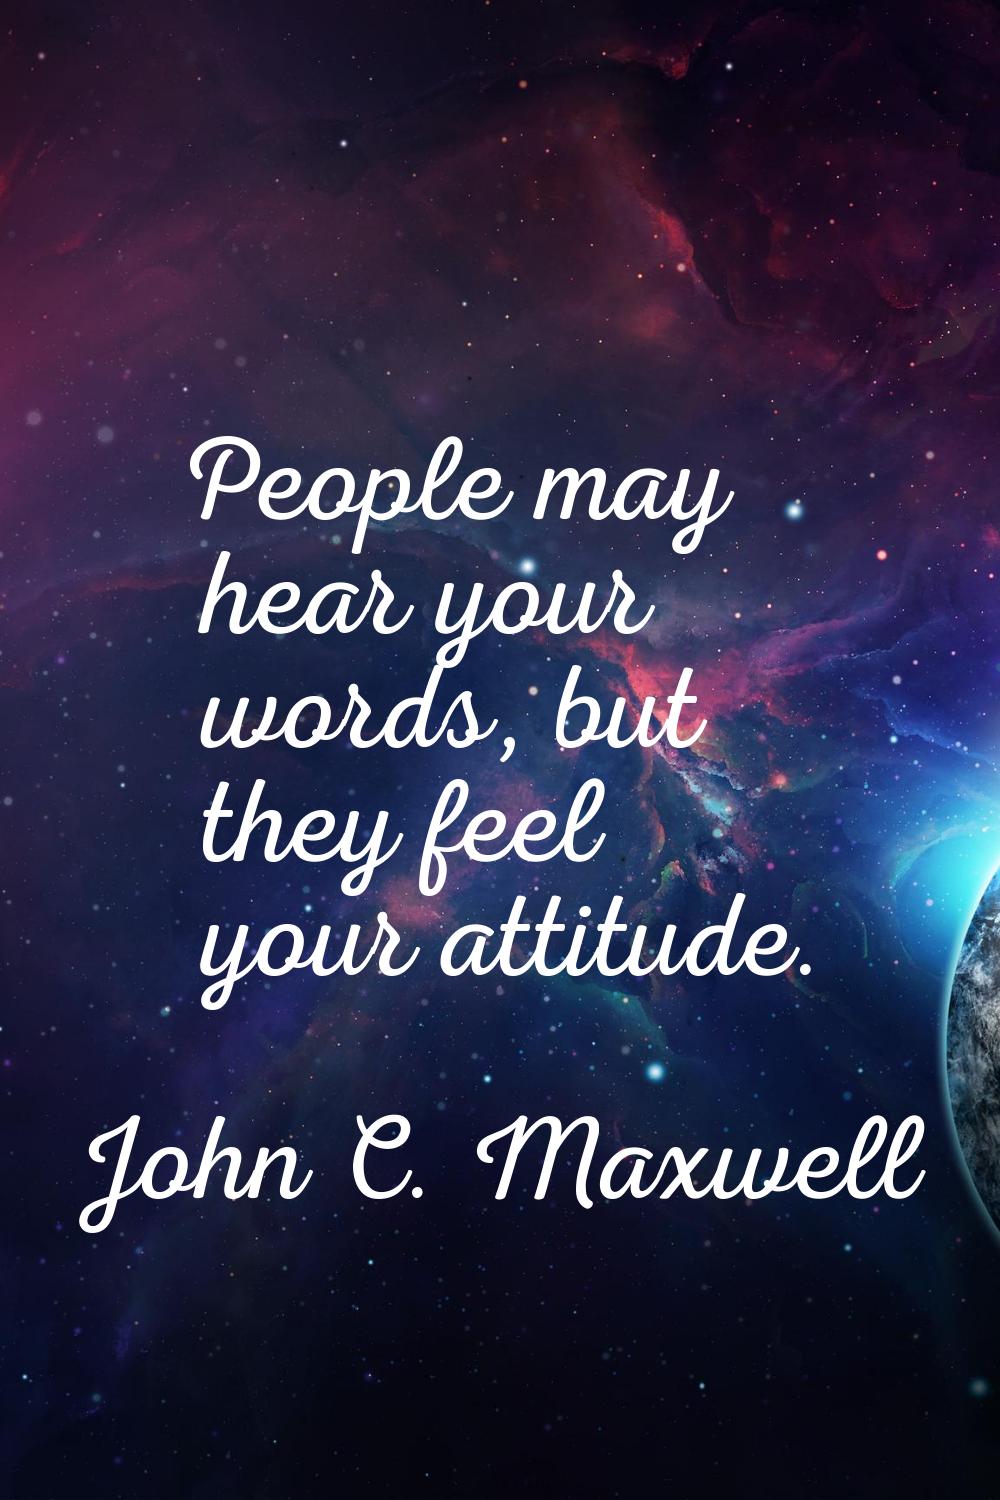 People may hear your words, but they feel your attitude.